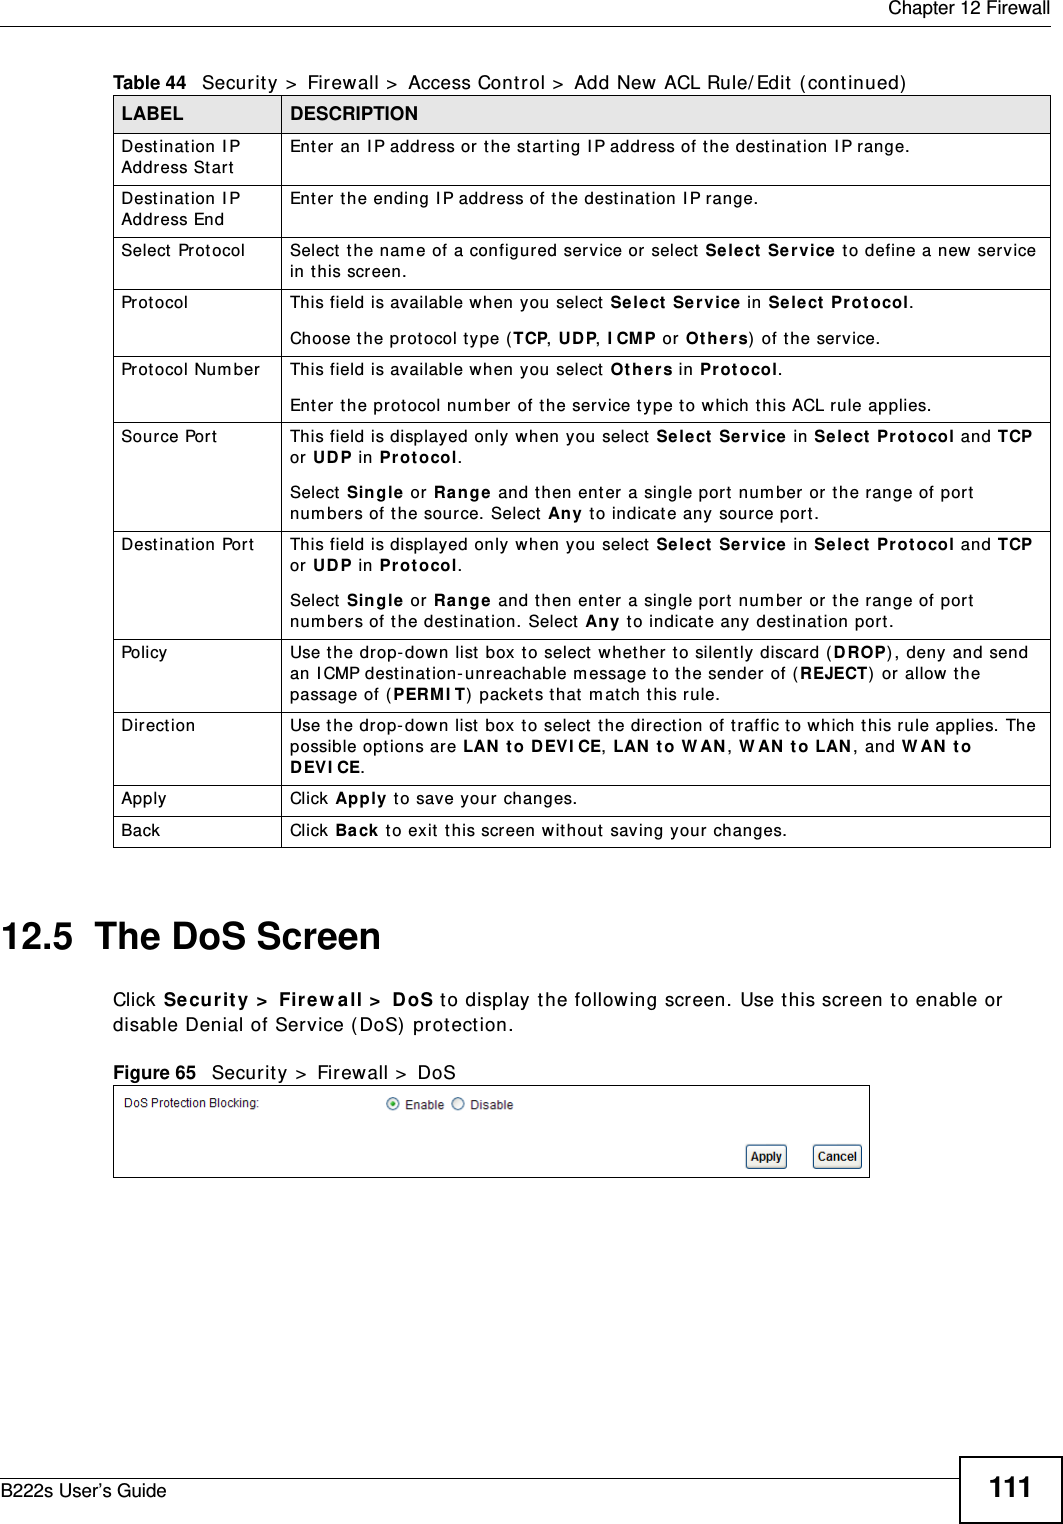  Chapter 12 FirewallB222s User’s Guide 11112.5  The DoS ScreenClick Secur it y  &gt;  Fire w all &gt;  DoS t o display the following screen. Use t his screen t o enable or disable Denial of Service ( DoS)  protect ion. Figure 65   Secur it y &gt;  Firewall &gt;  DoSDest inat ion I P Address St artEnter an I P address or  t he st art ing I P address of t he destination I P range.Dest inat ion I P Address EndEnter t he ending I P address of the destinat ion I P range.Select  Prot ocol Select t he nam e of a configured service or select  Se lect  Ser vice to define a new service in t his screen.Prot ocol This field is available when you select Sele ct  Se r vice in Se lect  Pr ot ocol.Choose the prot ocol t ype (TCP, UDP, I CMP or O t he r s) of t he service.Prot ocol Num ber This field is available when you select Ot he r s in P ro t oco l.Enter t he pr otocol num ber of the service type to w hich t his ACL rule applies.Source Port This field is displayed only when you select Select  Ser vice  in Sele ct  Pr otocol and TCP or UDP in P rot o col.Select  Single or Ra nge  and t hen ent er a single port  num ber or the range of port  num bers of the source. Select  An y t o indicat e any source port.Dest inat ion Por t This field is displayed only when you select Select  Ser vice in Select Pr otocol and TCP or UDP in P rot o col.Select  Single or Ra nge  and t hen ent er a single port  num ber or the range of port  num bers of t he dest inat ion. Select  Any t o indicate any destinat ion port .Policy Use the drop- dow n list  box t o select whether t o silent ly discard ( D ROP) , deny and send an I CMP dest inat ion- unreachable m essage t o the sender  of (REJECT)  or allow  t he passage of ( PERM I T)  packets that  m atch this rule.Direct ion Use t he drop- down list  box to select  t he direction of traffic t o which t his rule applies. The possible options are LAN  t o DEVI CE, LAN  t o W AN , W AN  t o LAN , and W AN t o DEVI CE.Apply Click Apply t o save you r changes.Back Click  Ba ck t o exit  t his screen wit hout saving your changes.Table 44   Security &gt;  Firewall &gt;  Access Control &gt;  Add New ACL Rule/ Edit  ( cont inued)LABEL DESCRIPTION